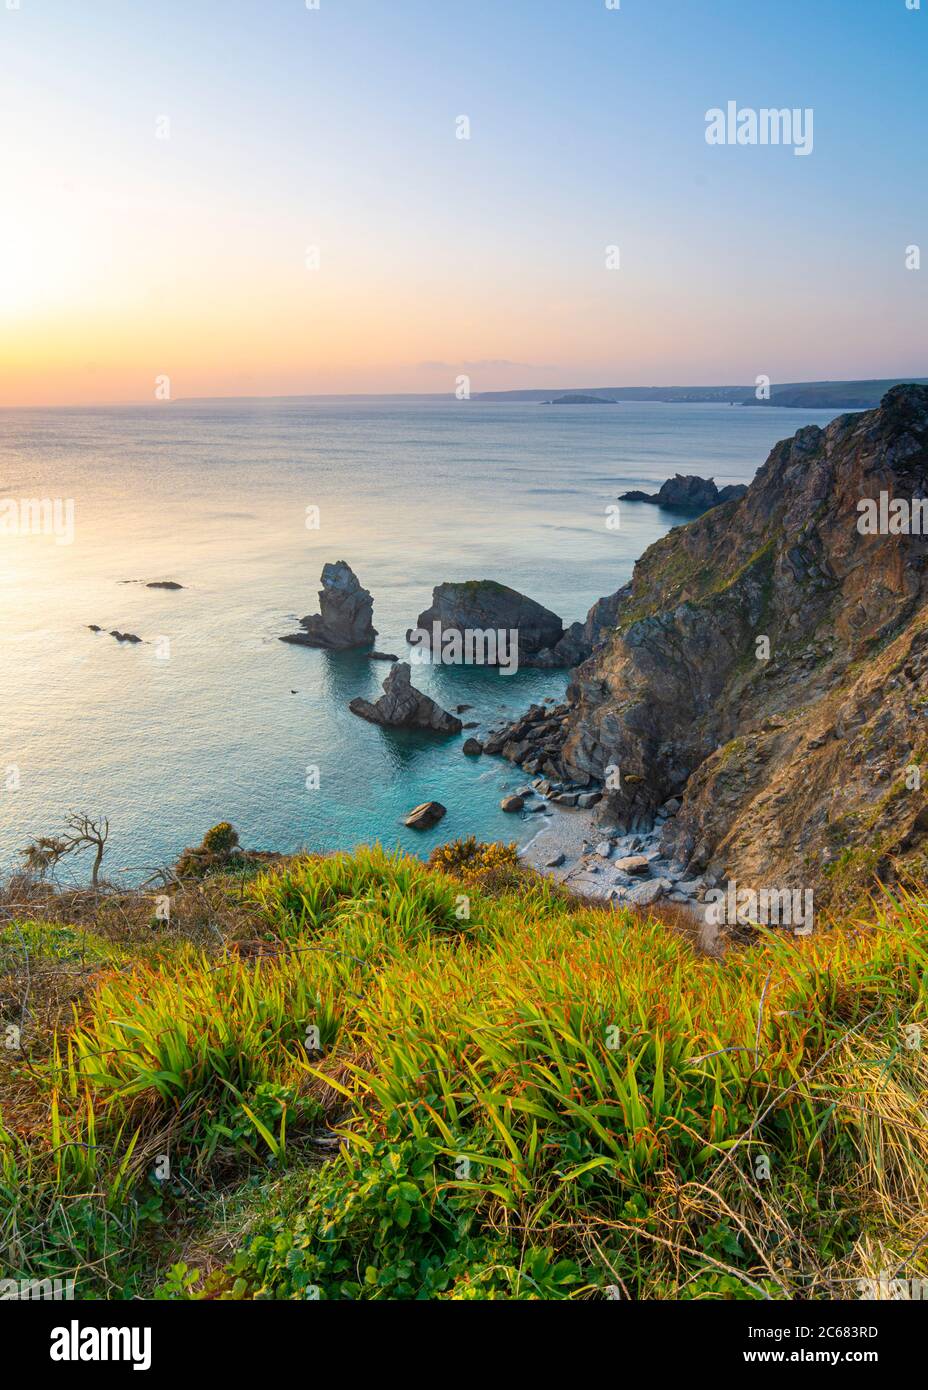 Clear Skies Over the Cliffs - Hope Cove, Devon, England Stockfoto